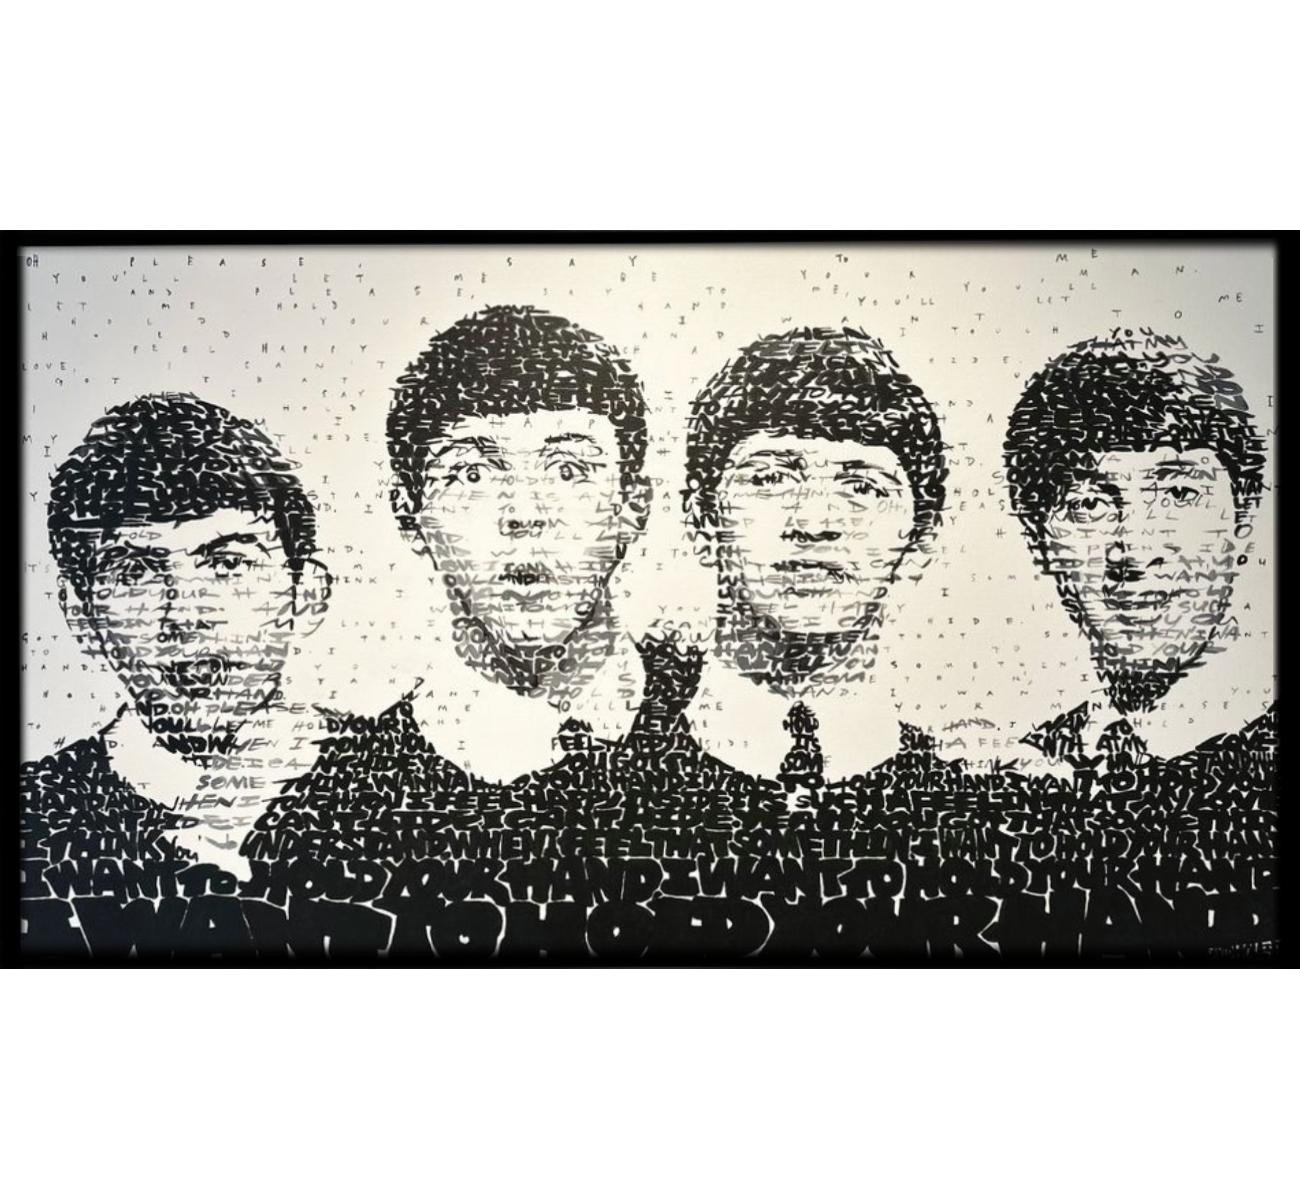 David Hollier
Beatles (text from ‘I Want to Hold Your Hand’)
2023
Acrylic on Canvas
24" x 47"

About David Hollier

Born and raised in Wolverhampton in the U.K. David Hollier now resides and works from his studio in Bushwick, Brooklyn, N.Y. David